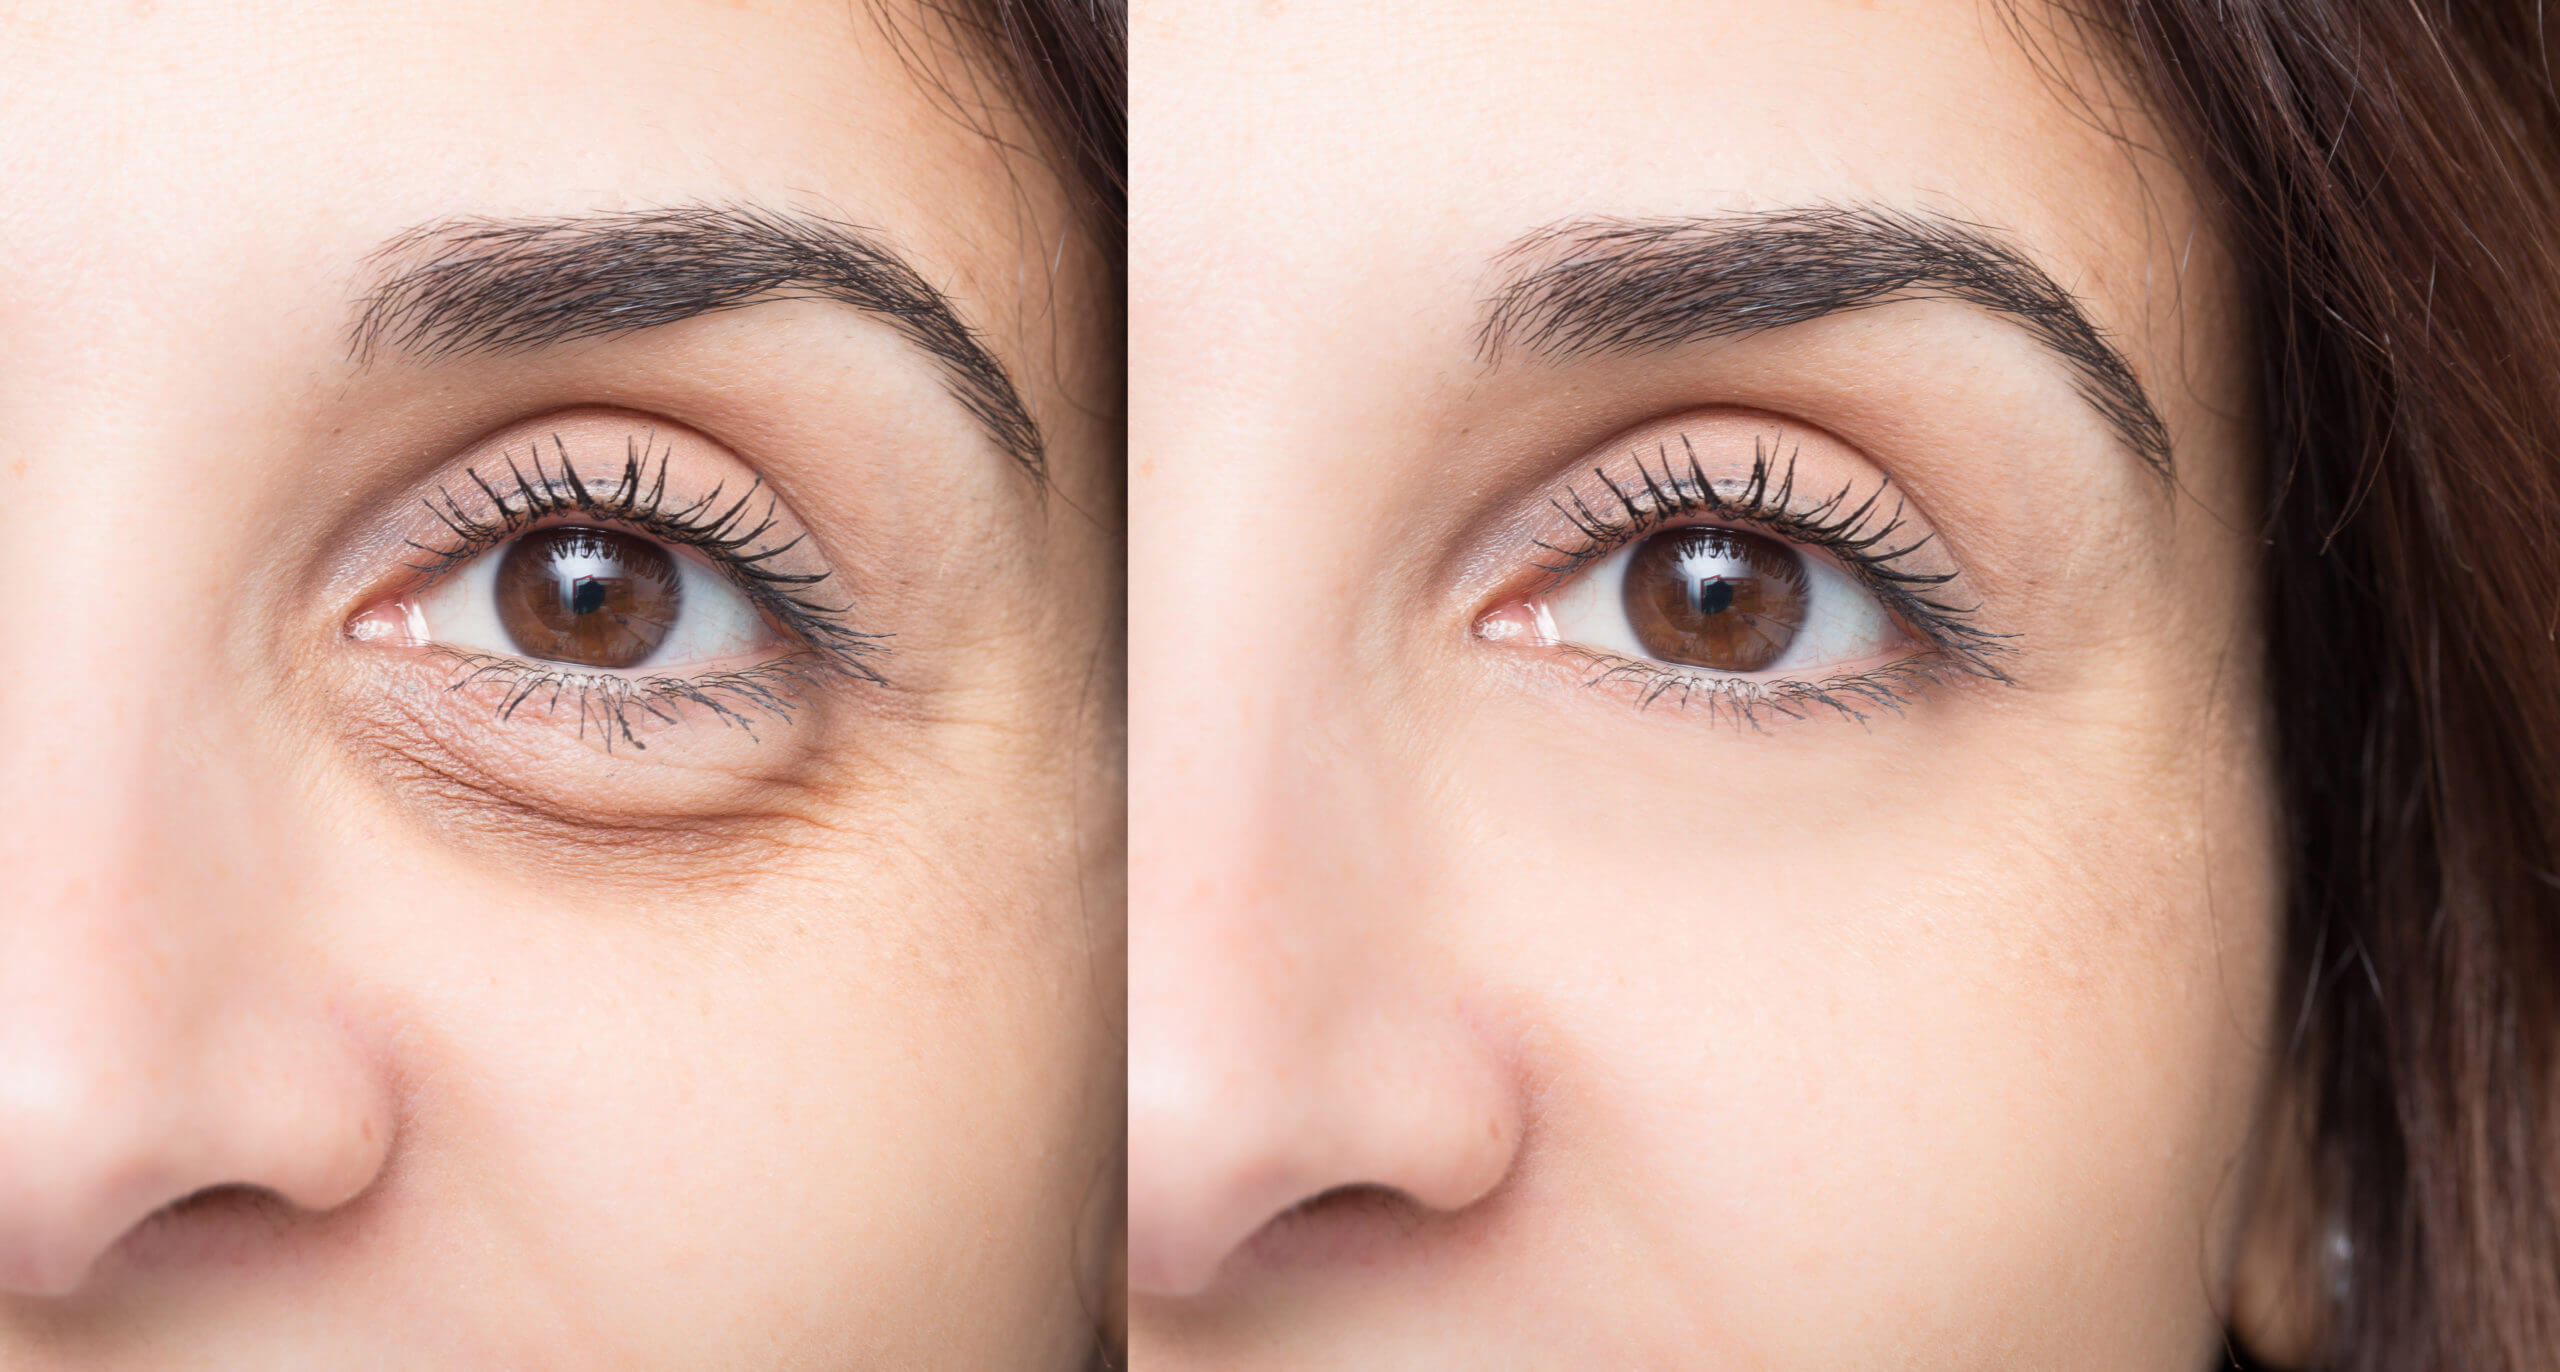 Tear Trough / Under eye fillers treatment in Norco CA by Le Meilleur Beauty and Wellness